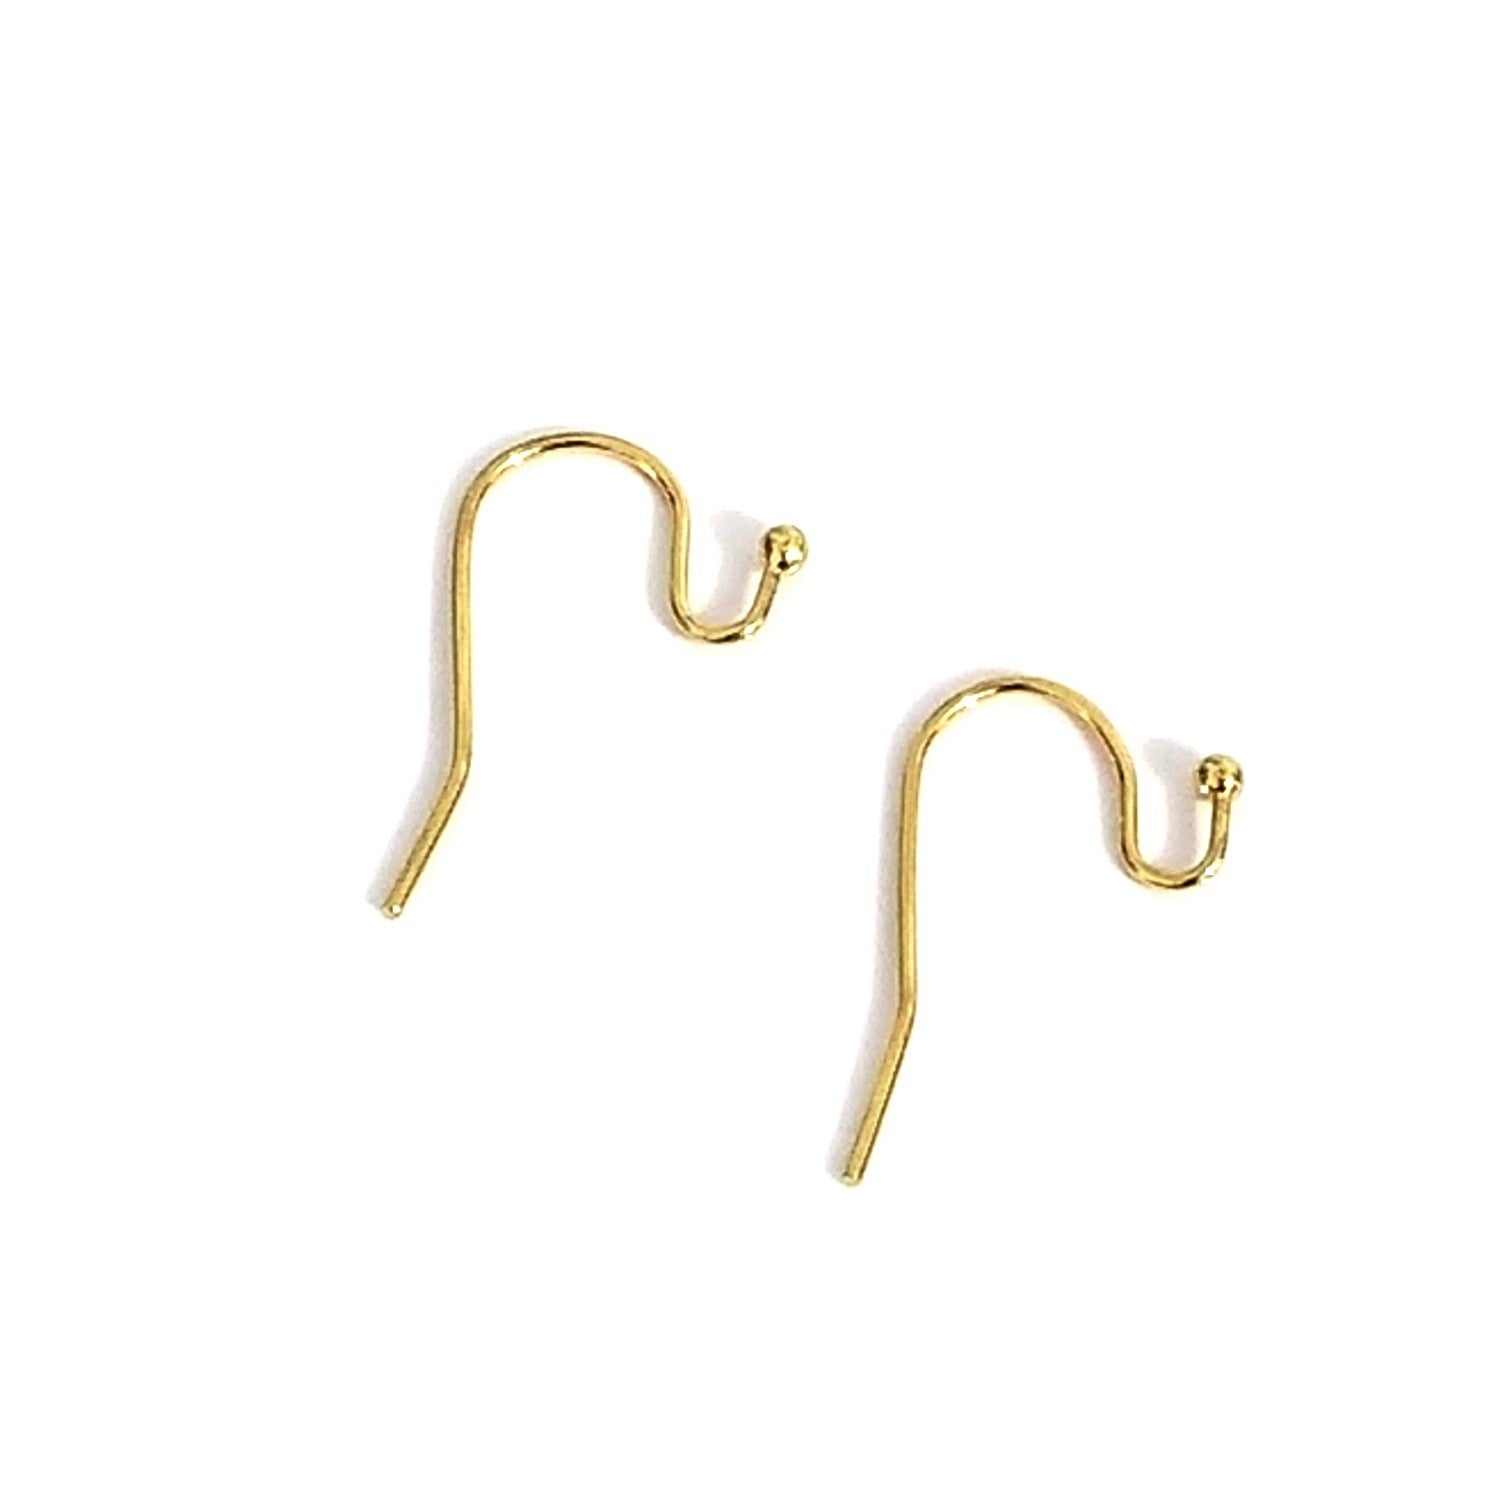 E863 - 50 pcs 304 Stainless Steel Earring Hooks with Loop Hole - 27mm x  20mm - Large Loop: 6mm - Gold - Favored Memories